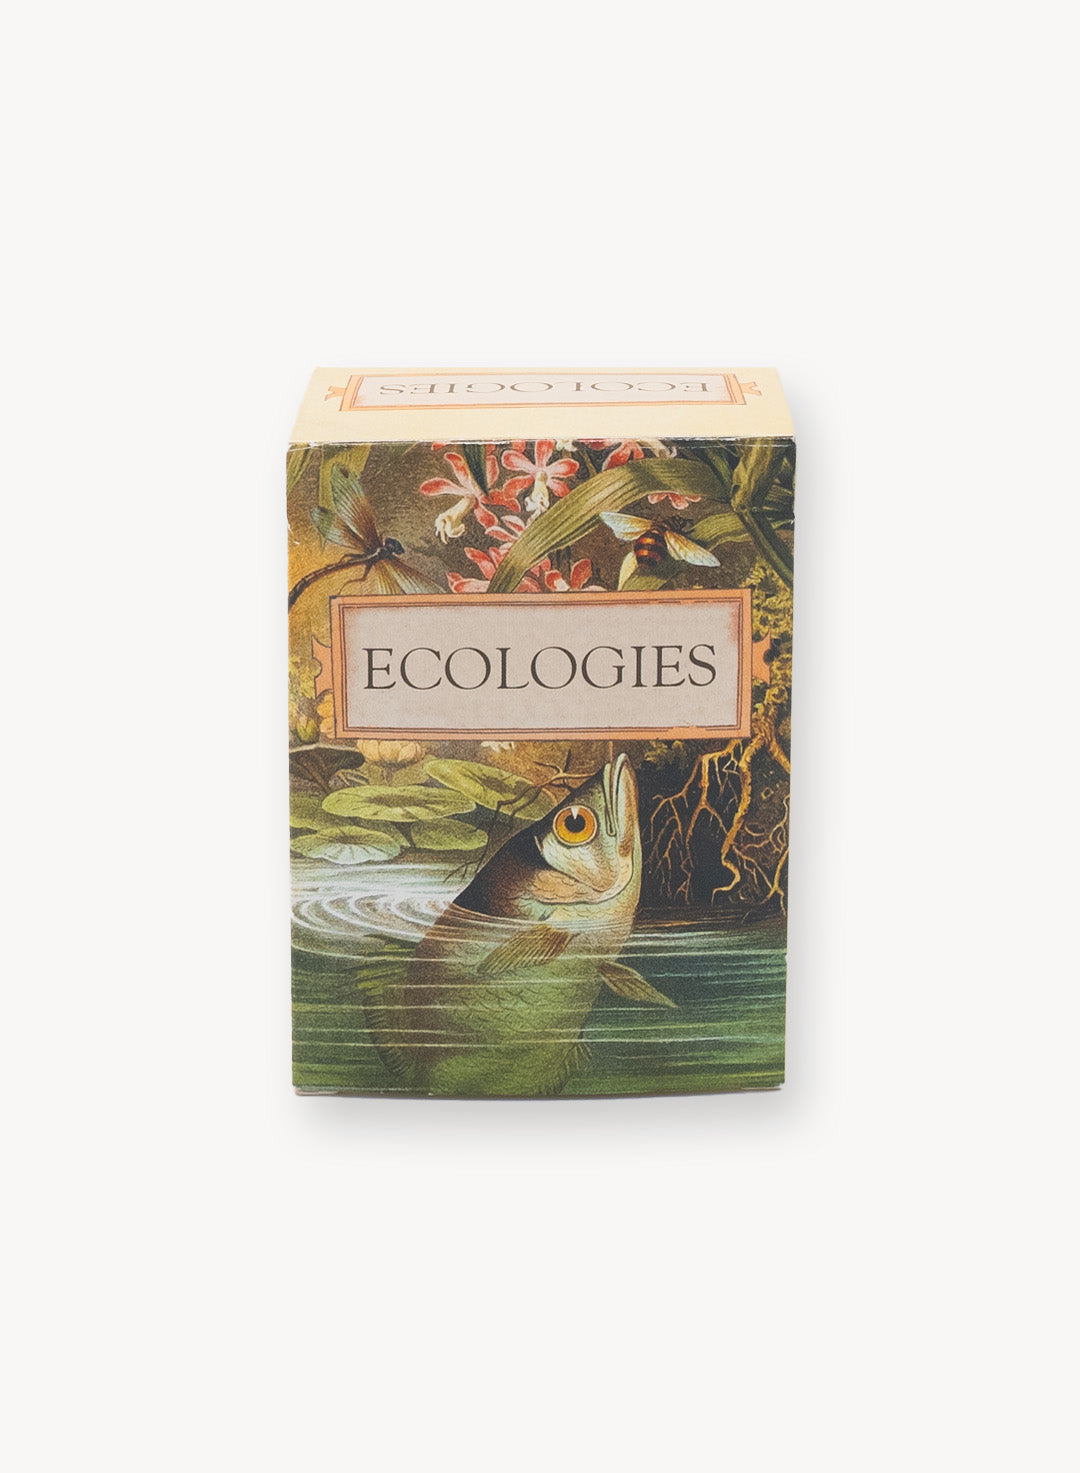 Product_Ecologies-front.jpg